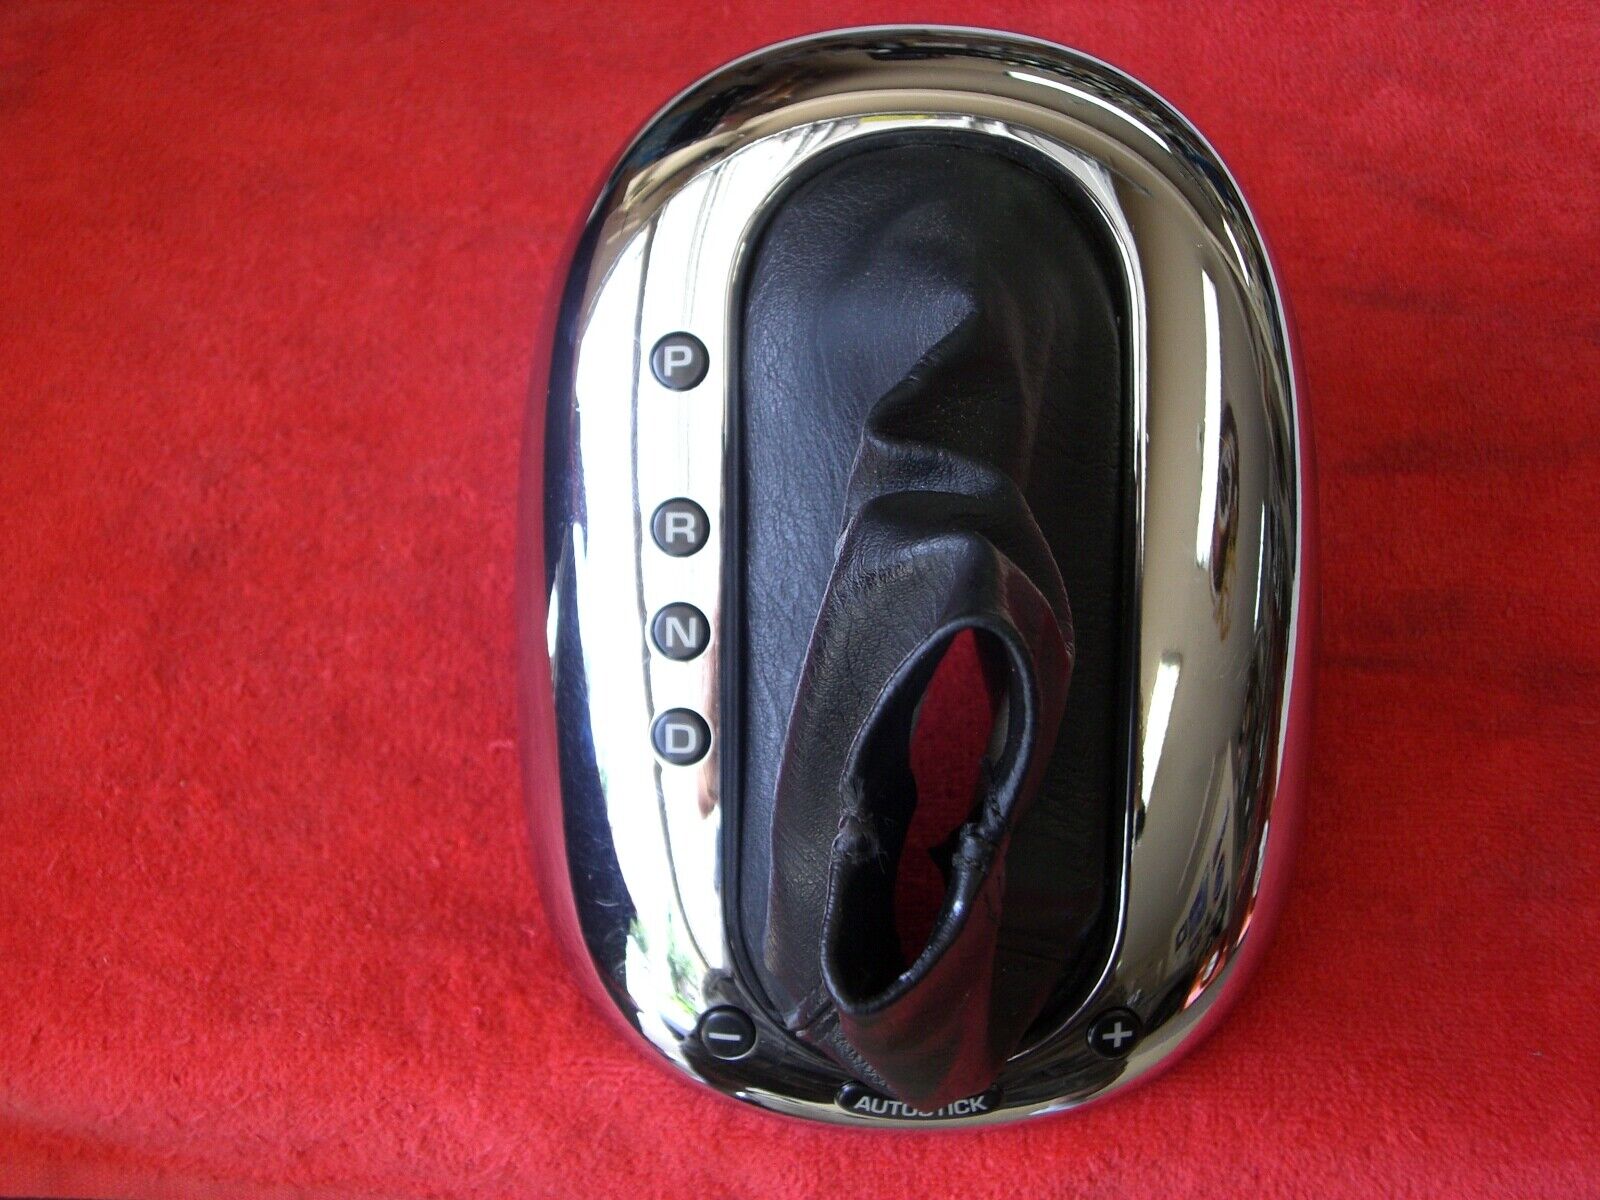 00-02 Chrysler Plymouth Prowler Chrome Shift Bezel with Boot. Fits 97 & 99 too.